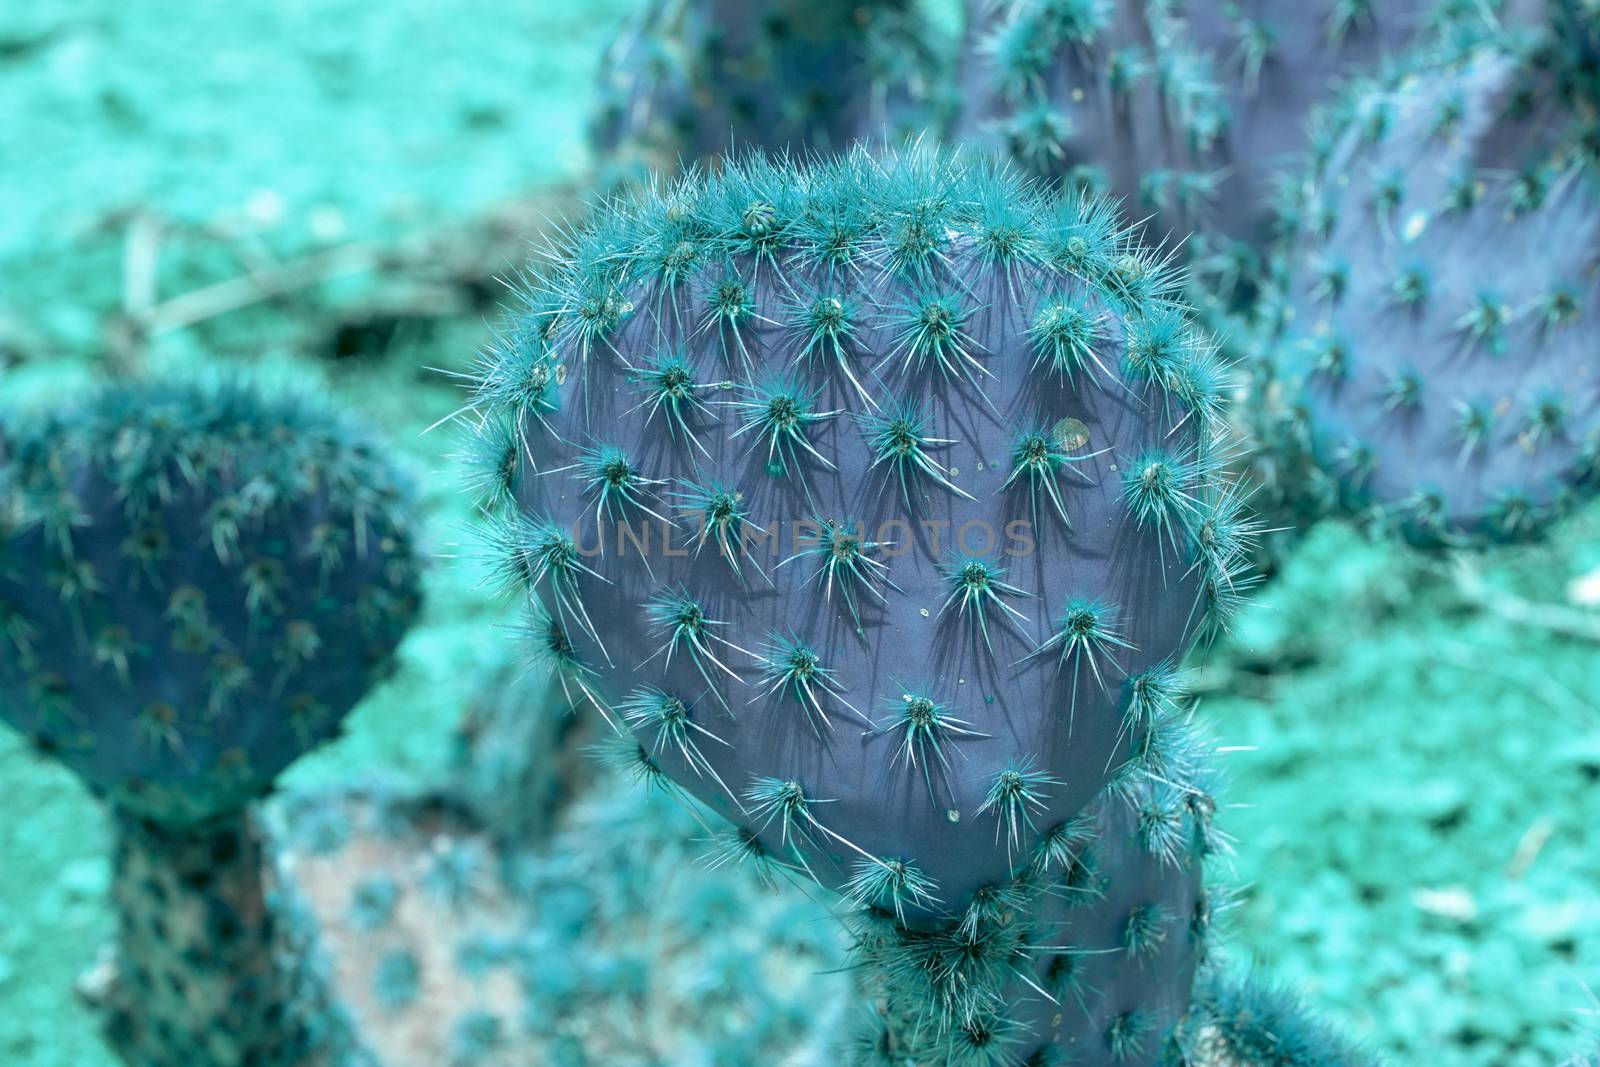 Abstract purple and turquoise thorny cactus closeup  by ArtesiaWells